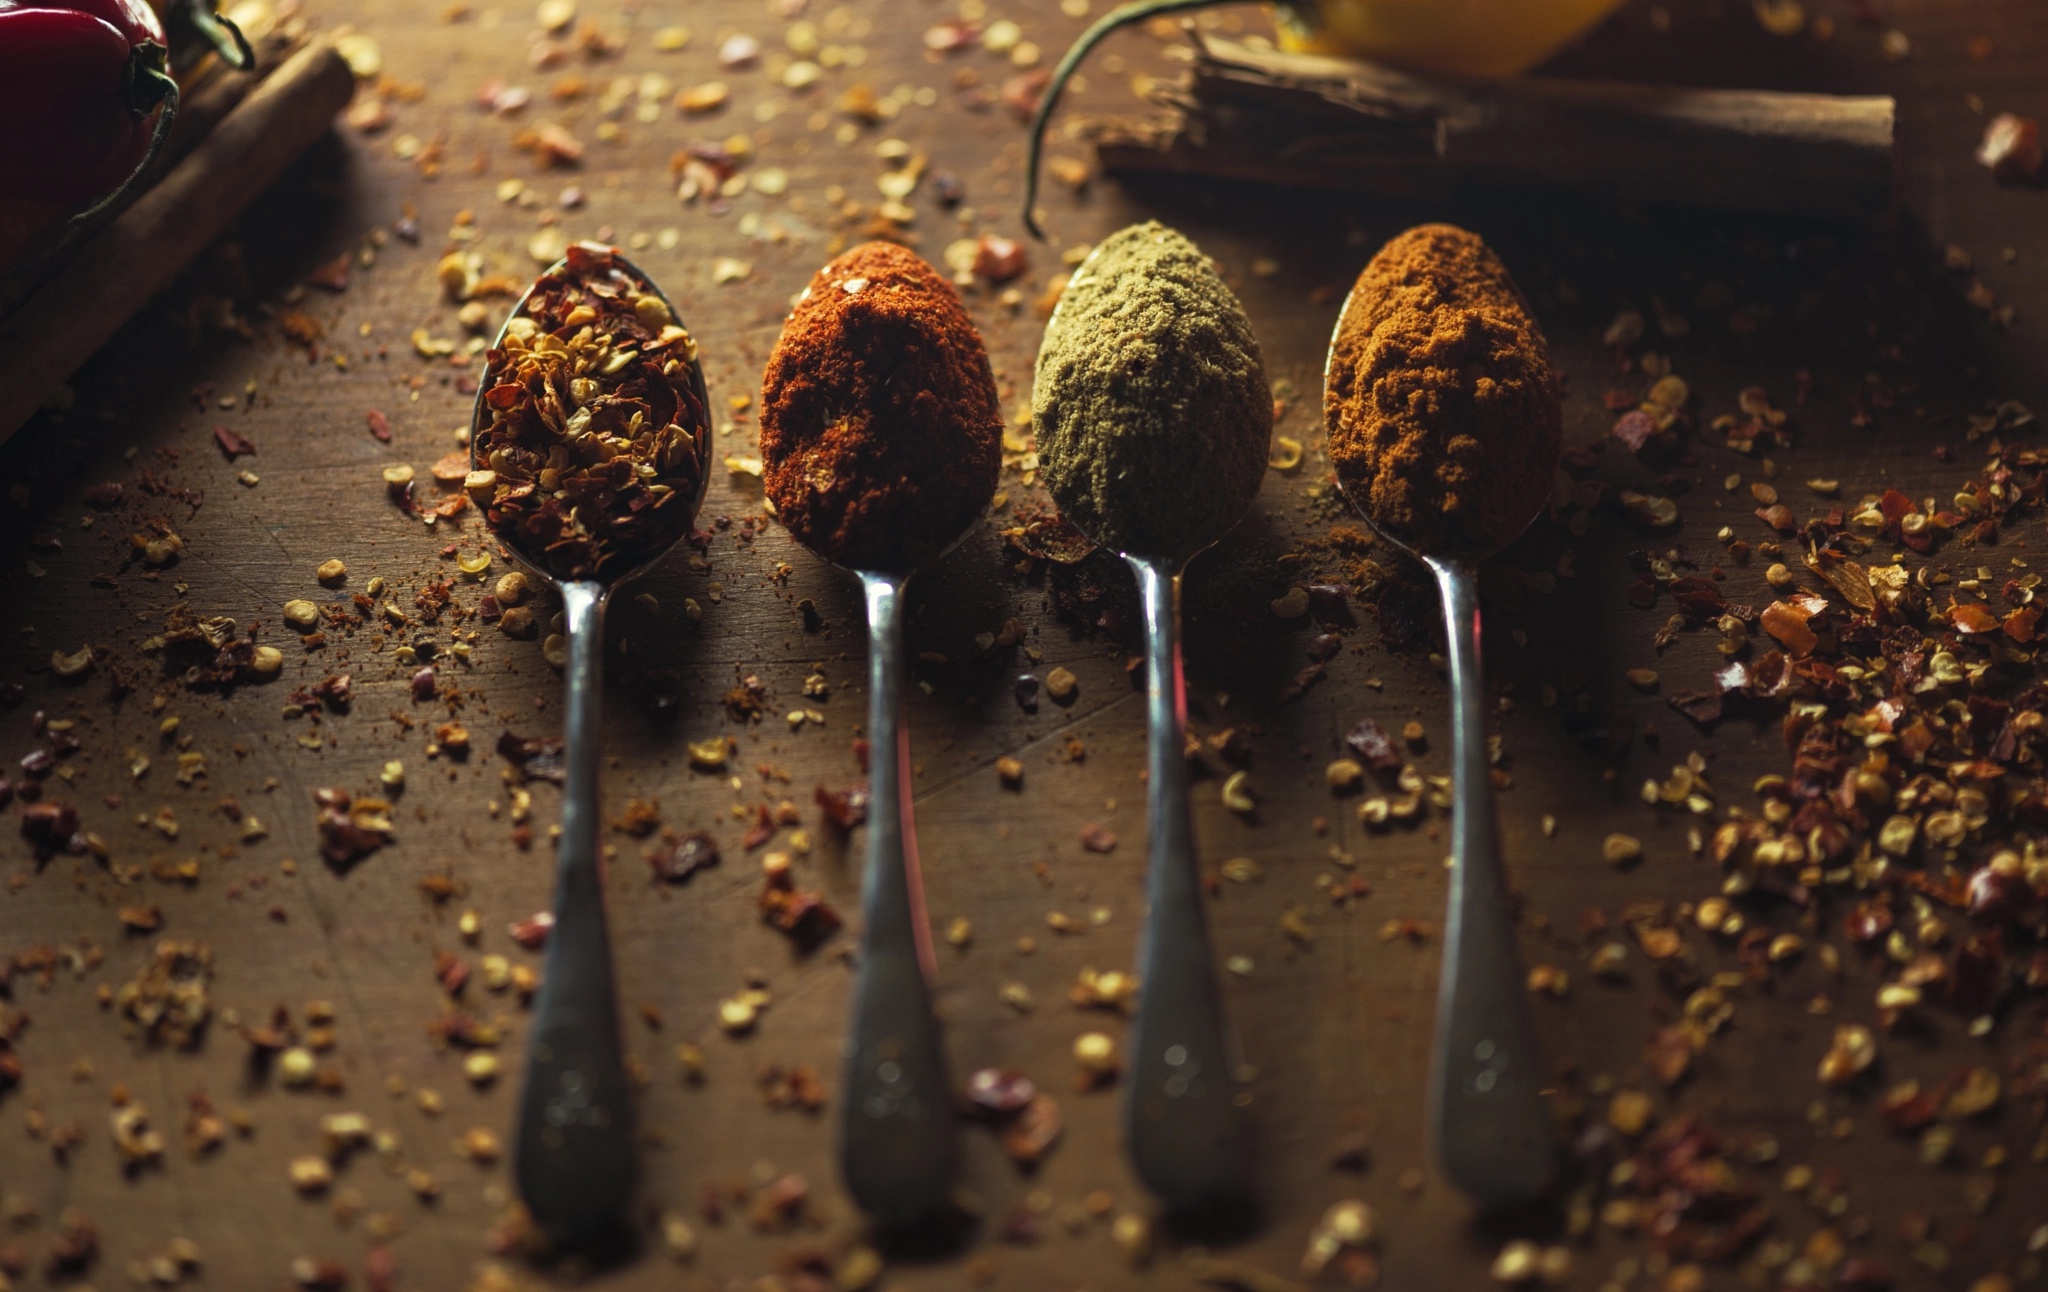 General 2048x1292 spoon food spices depth of field paprika (spice)